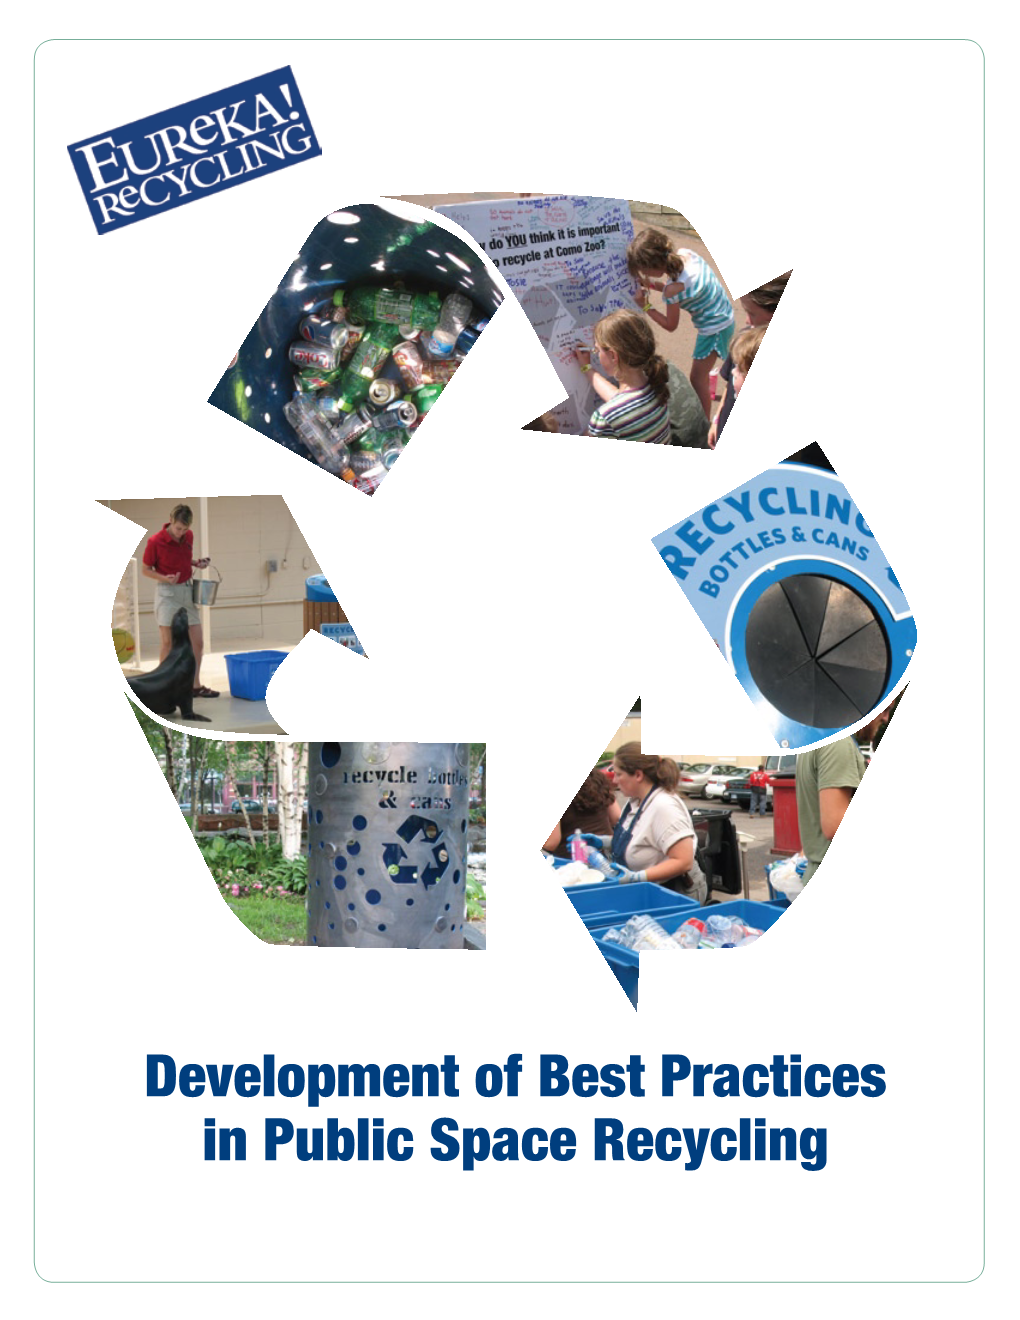 Development of Best Practices in Public Space Recycling